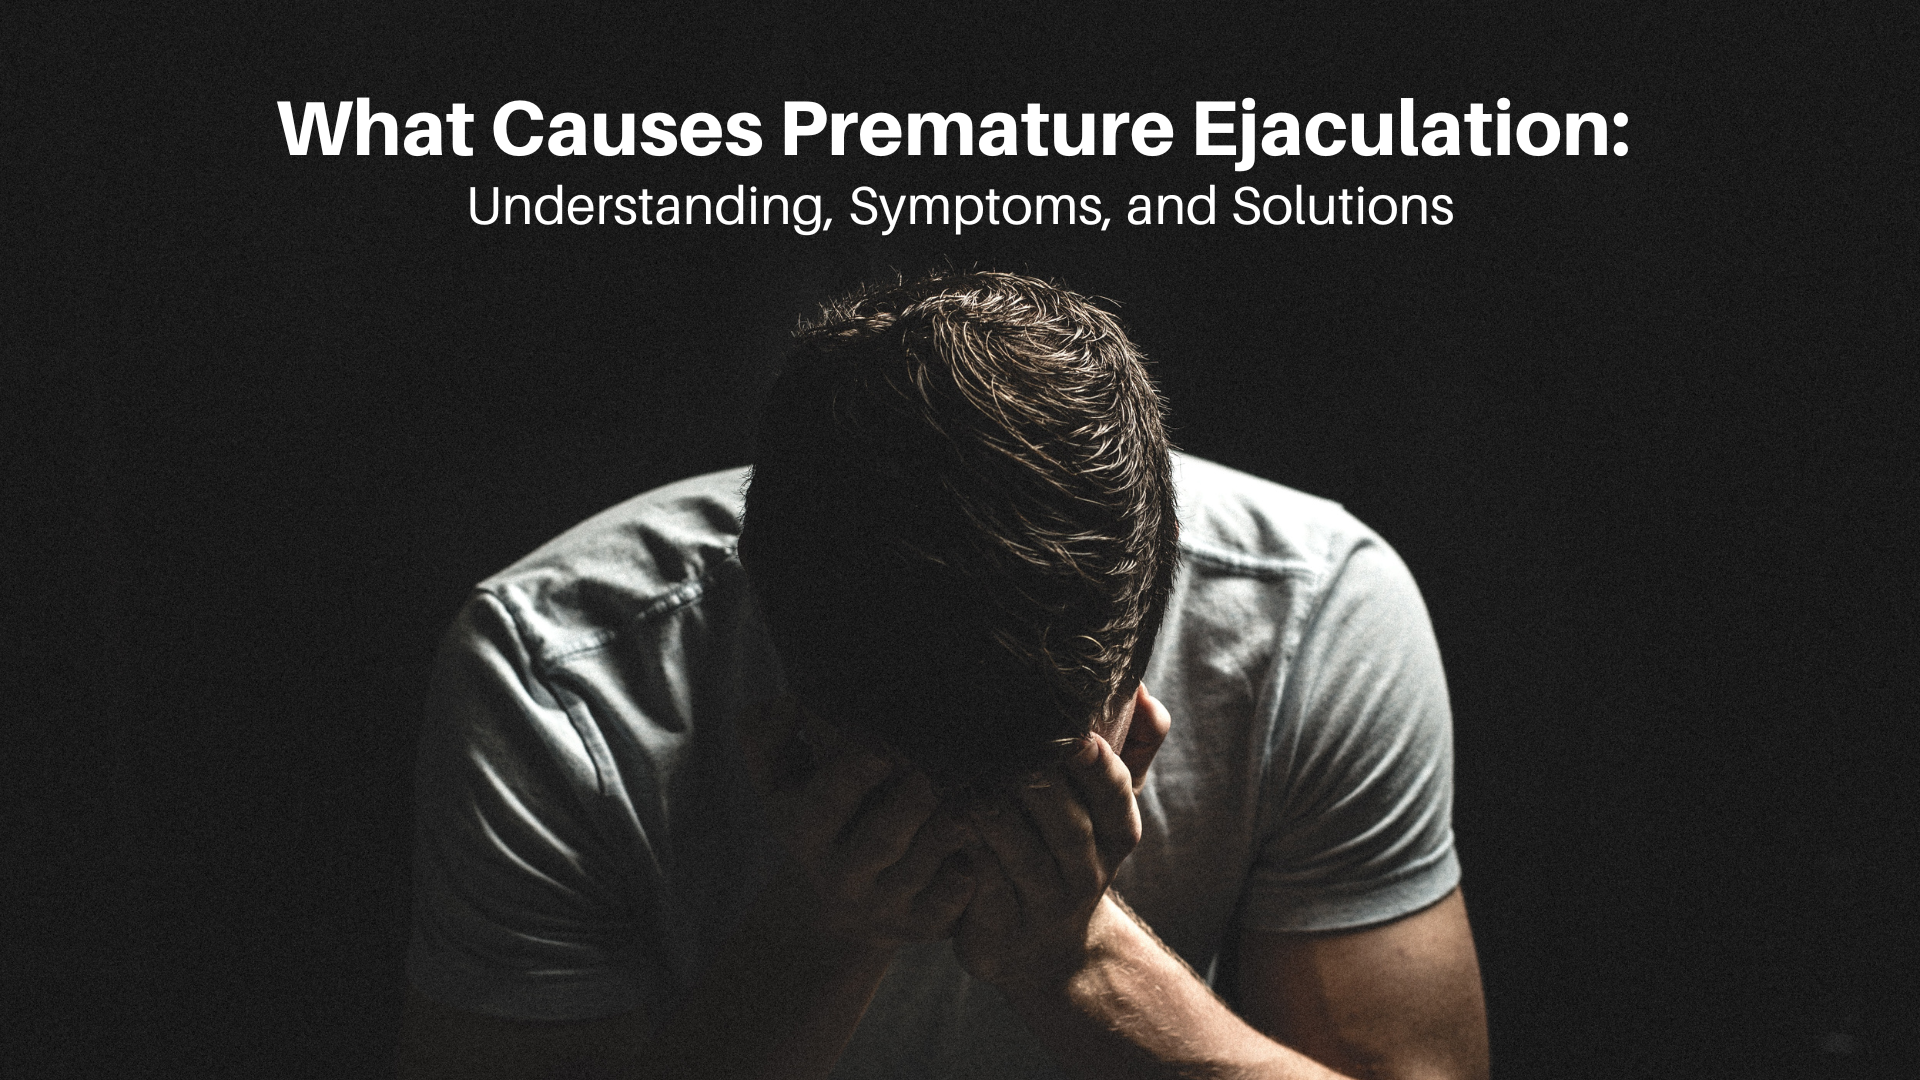 What Causes Premature Ejaculation: Understanding, Symptoms, and Solutions